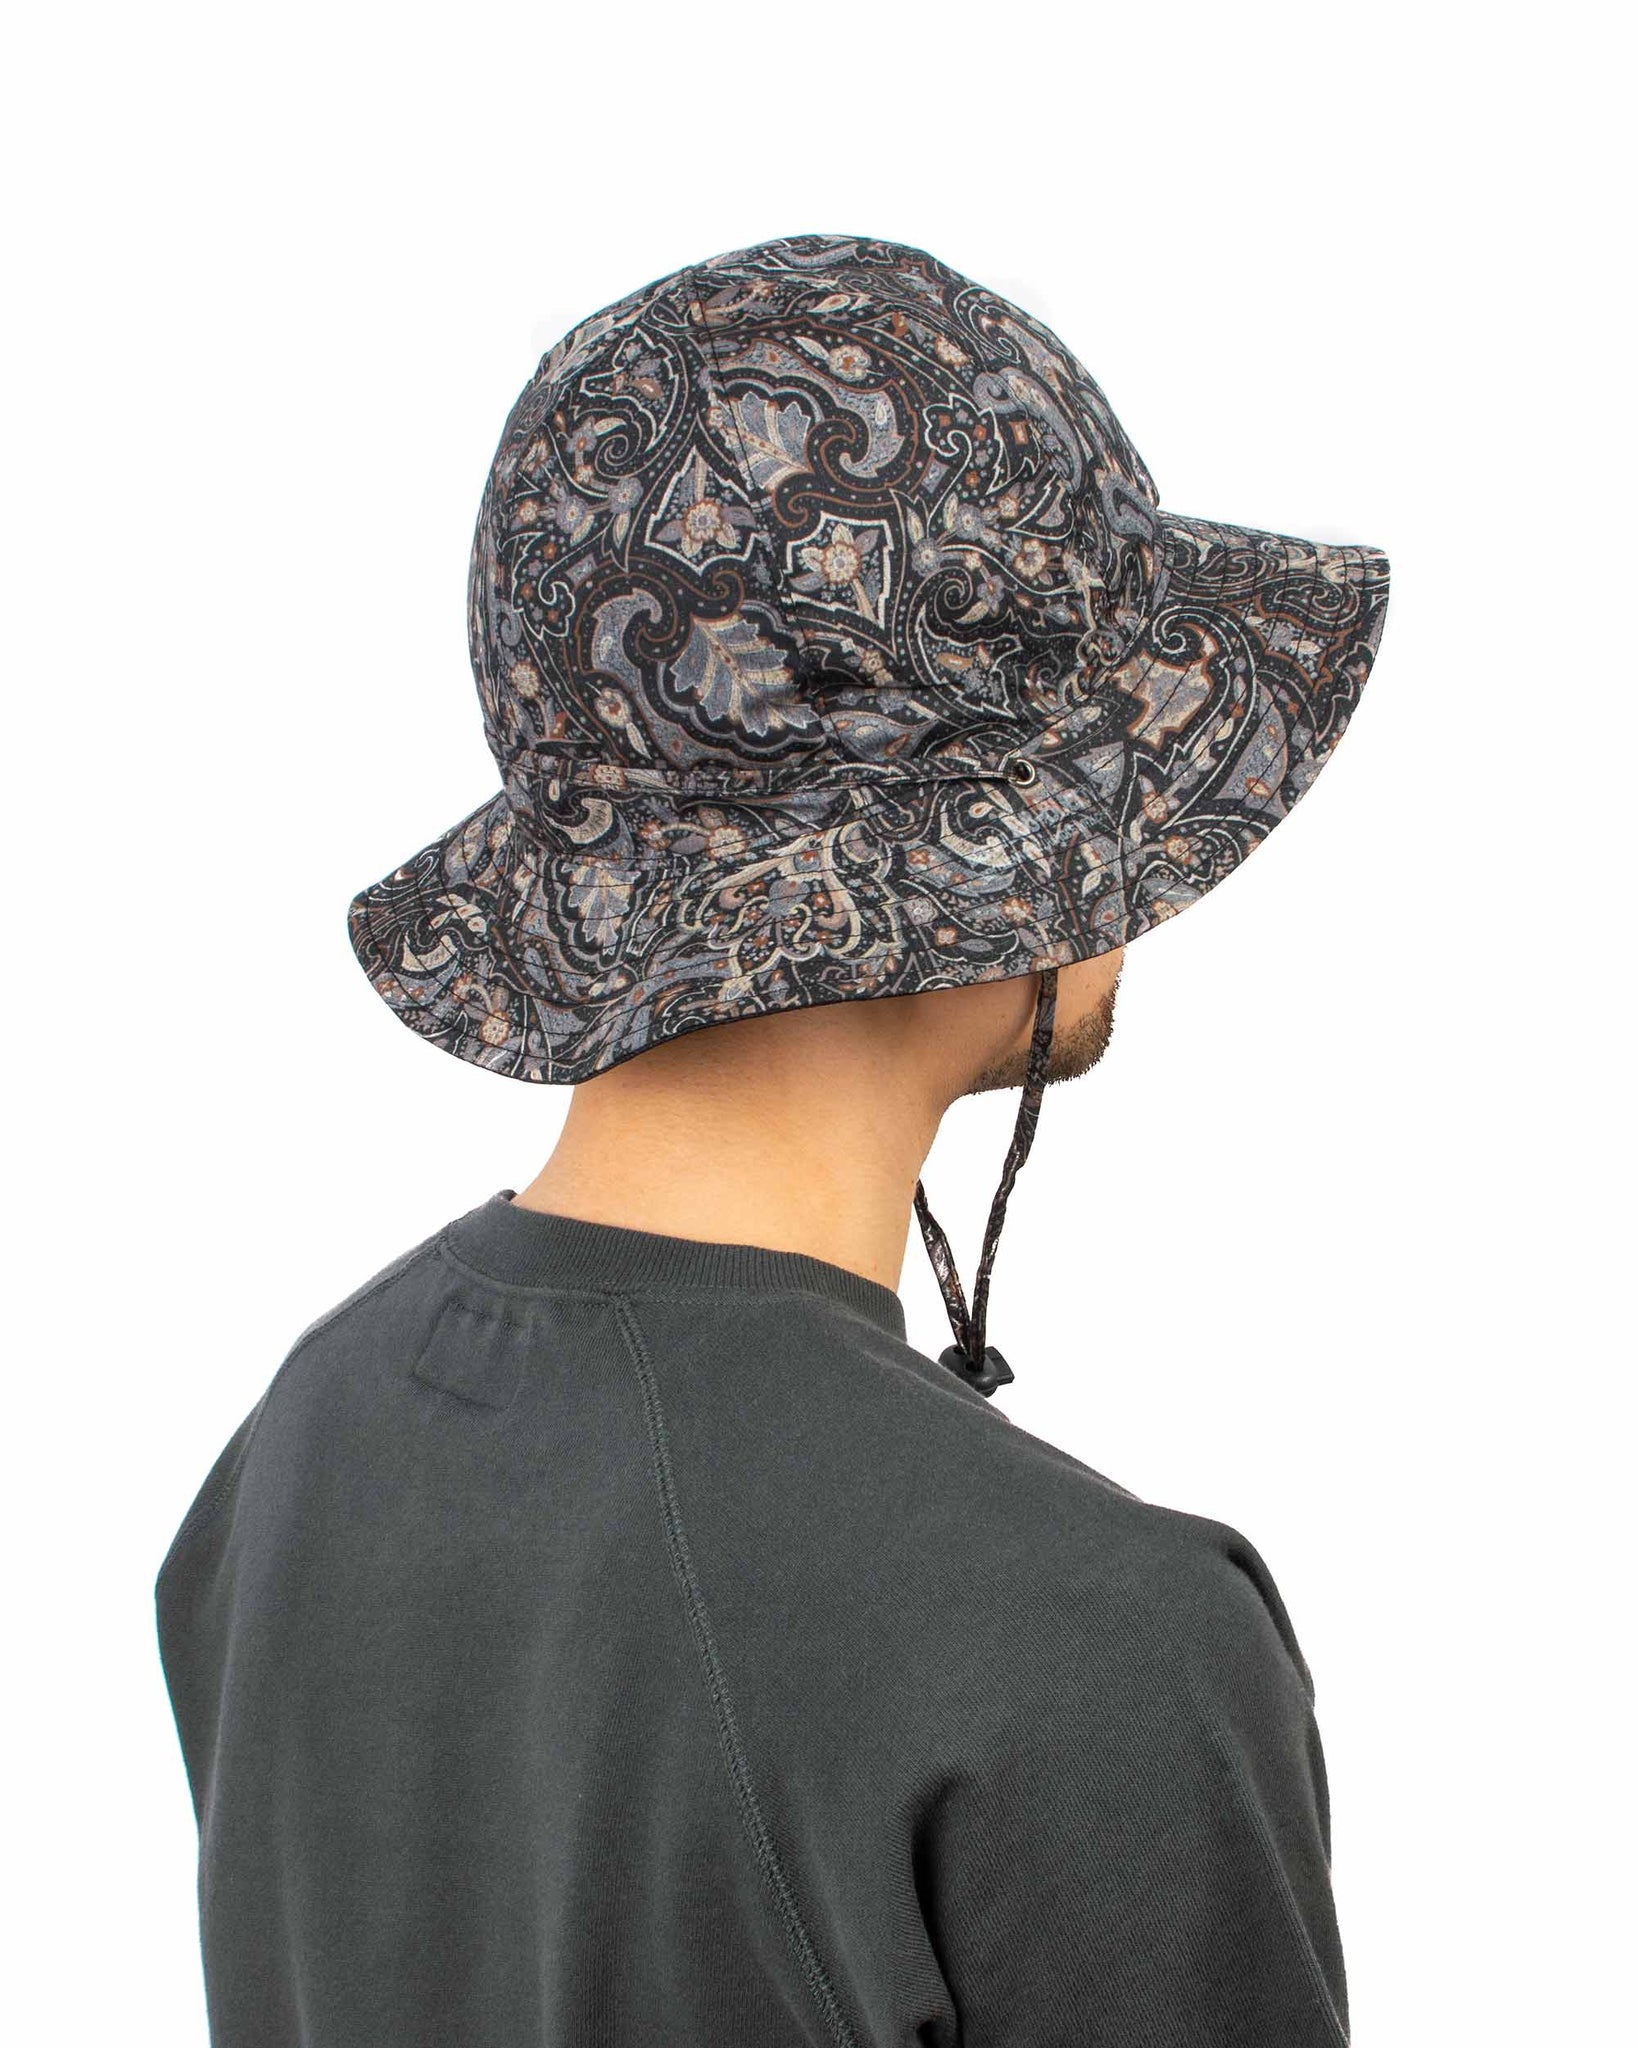 Found Feather Military Sun Hat (Reversible) Paisley + Yoryu Black Back